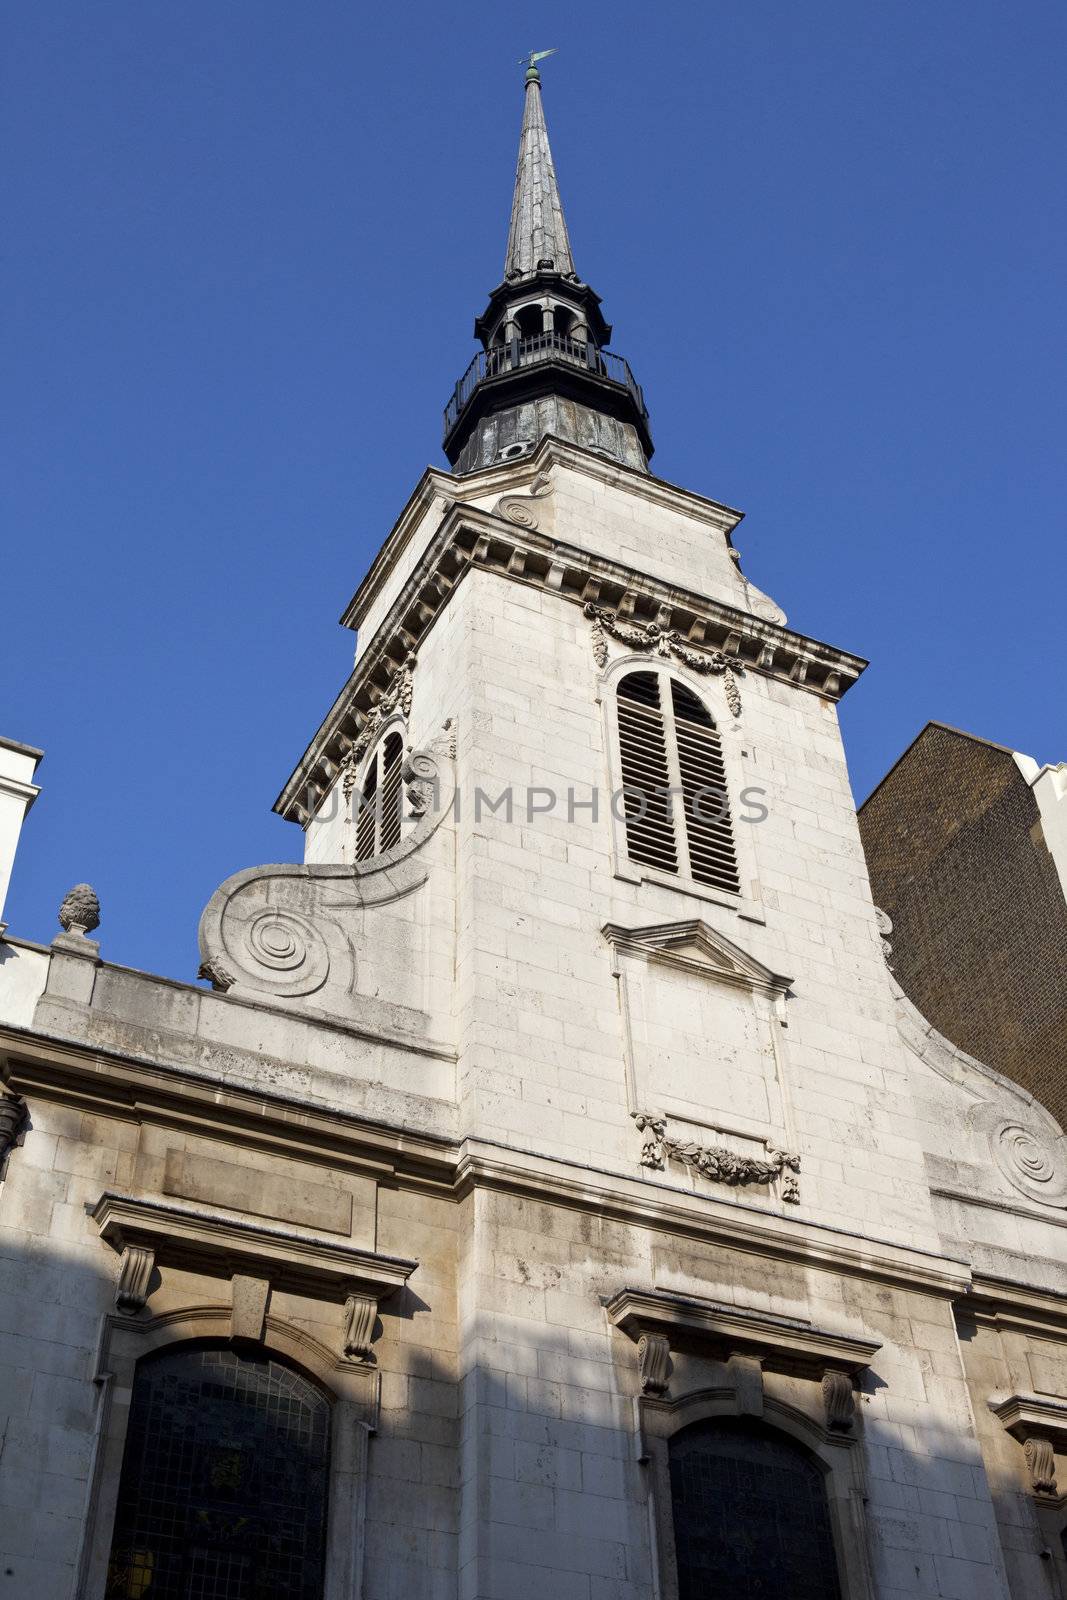 St. Martin-Within-Ludgate situated on Ludgate Hill in London.